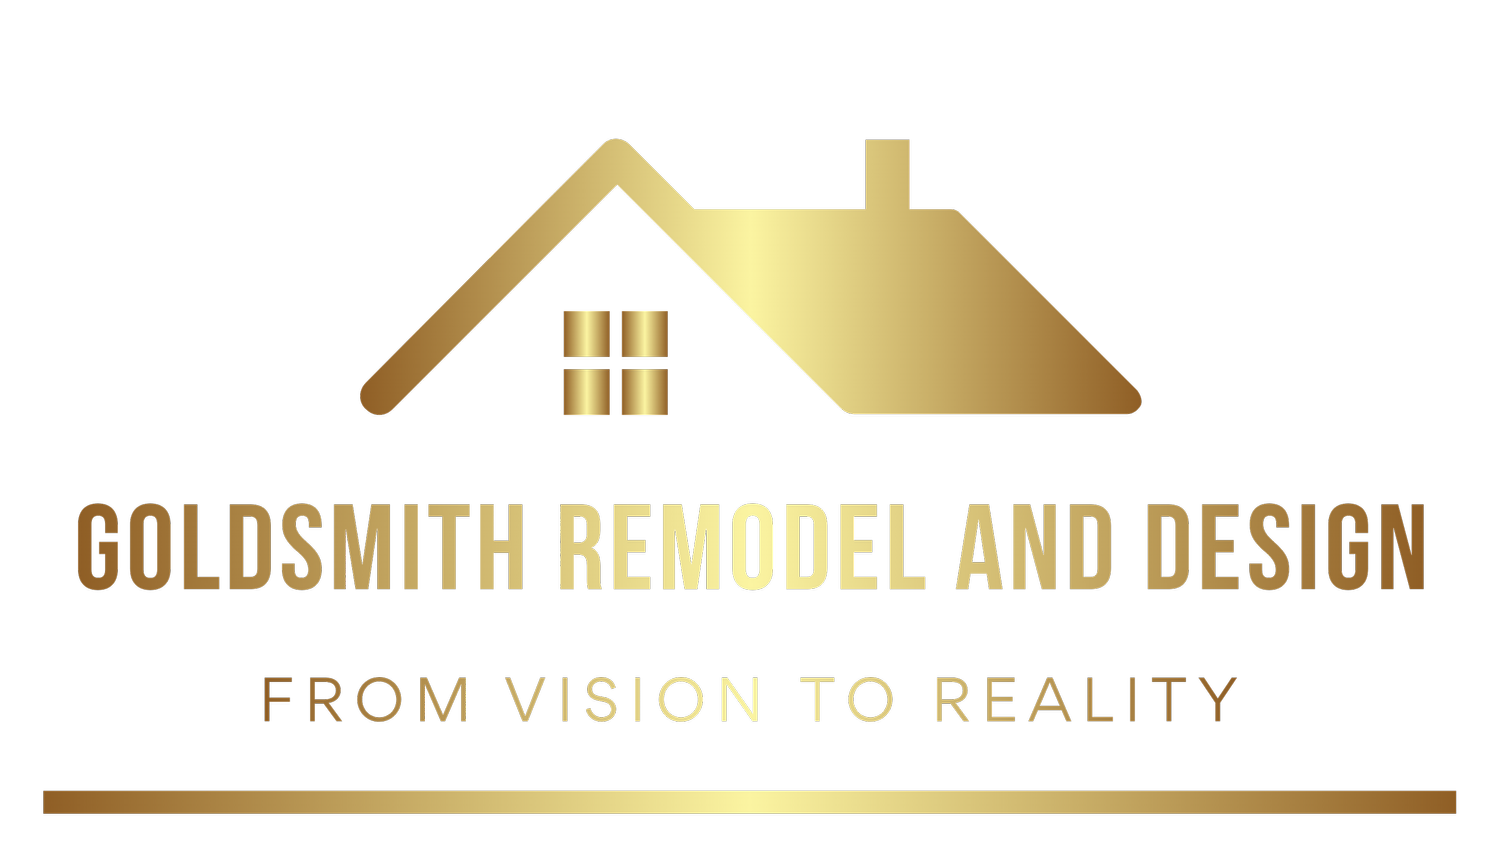 Goldsmith Remodel and Design